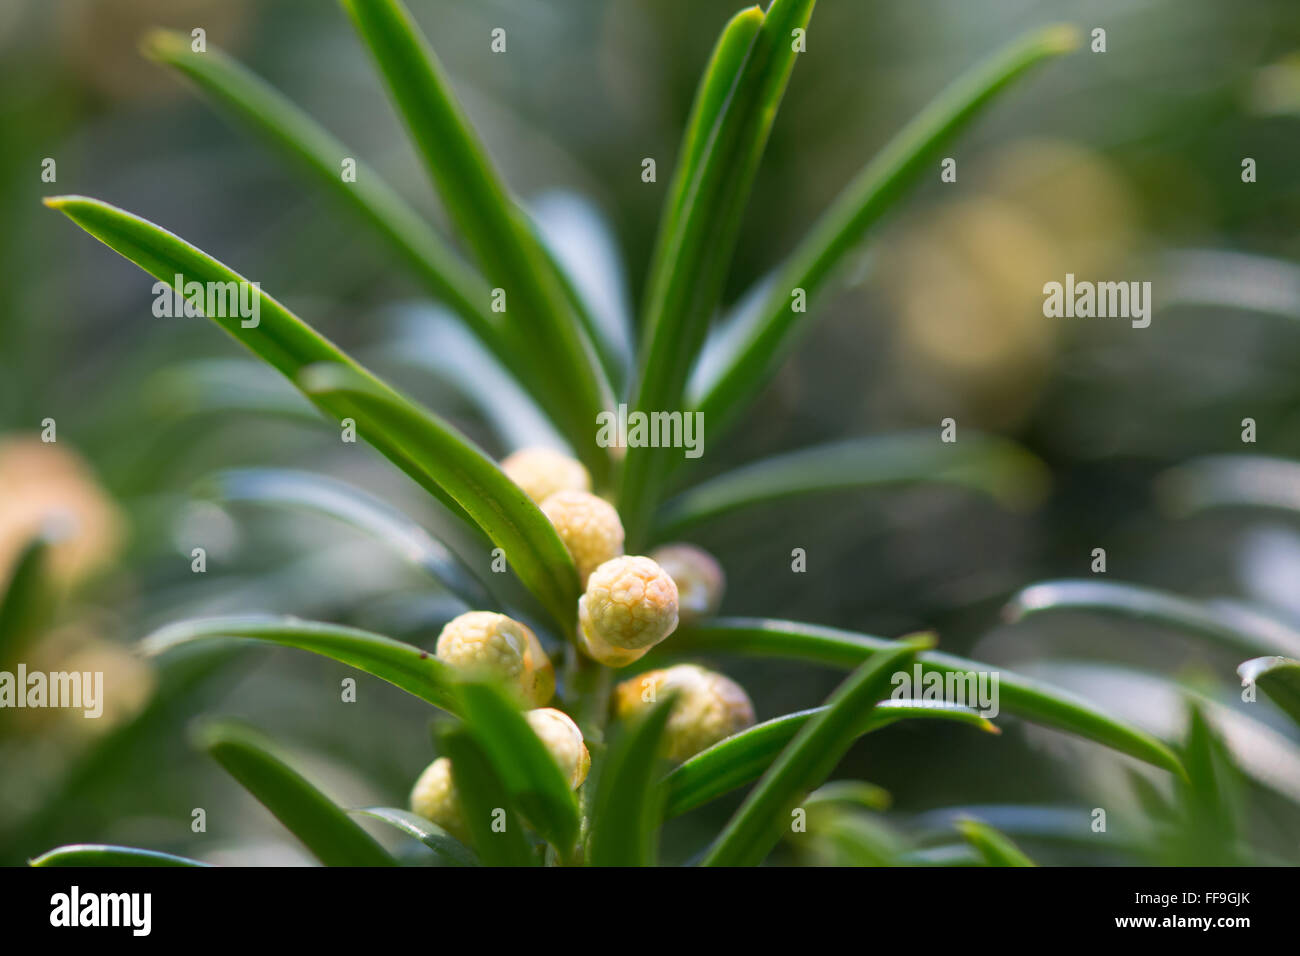 Yew tree (Taxus baccata) in flower. Leaves and flowers on a coniferous tree in a churchyard Stock Photo